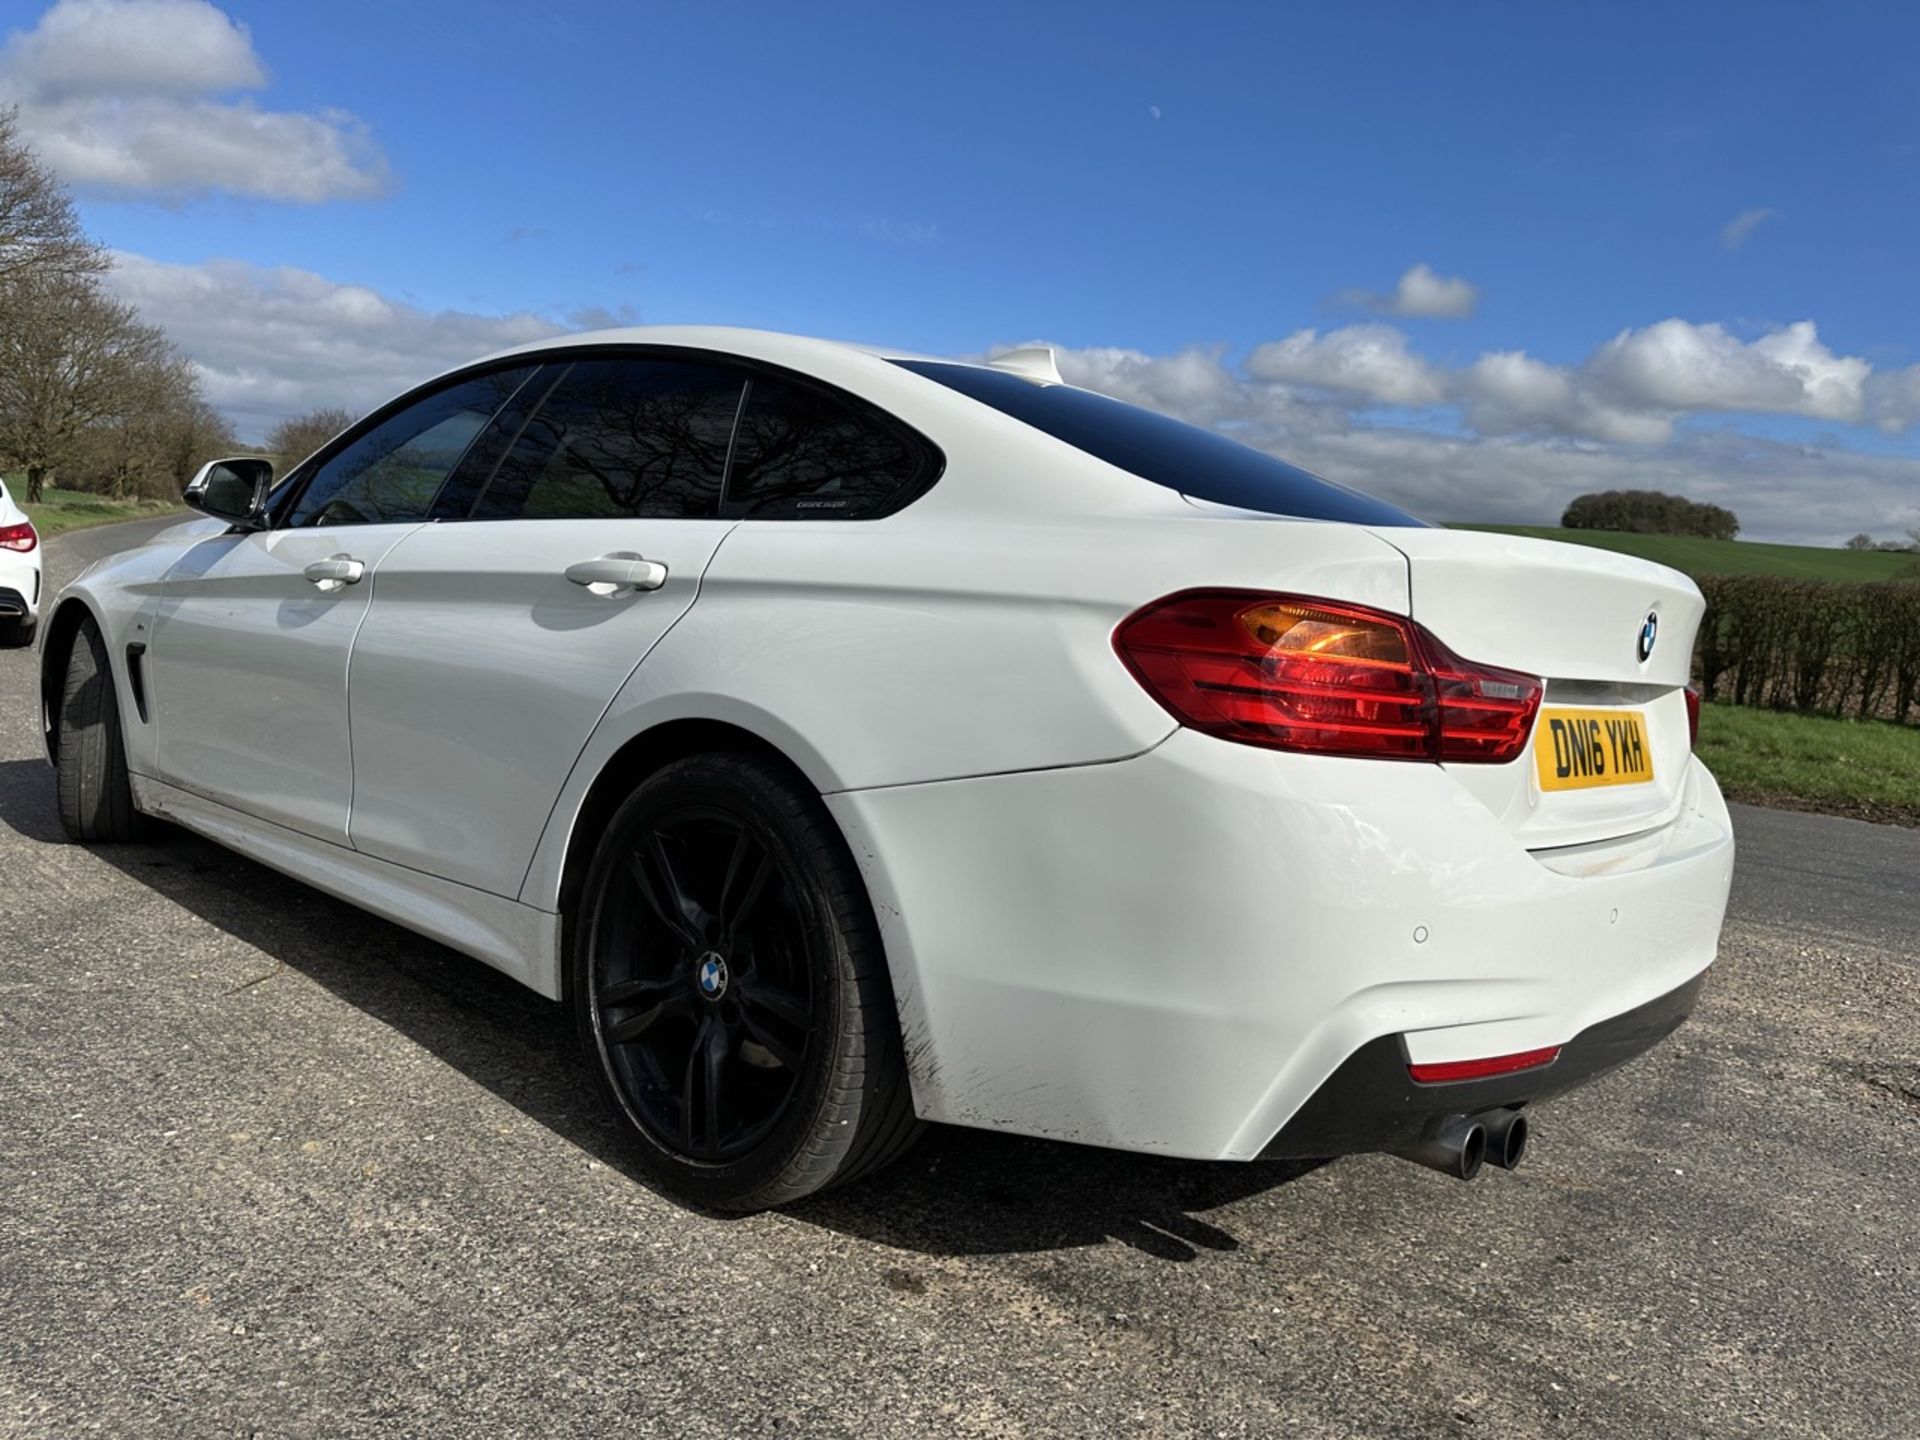 BMW 4 SERIES 420i M Sport 5dr [Professional Media] Manual - Petrol - 2.0 - Coupe- 54k miles - 2016 - Image 6 of 22